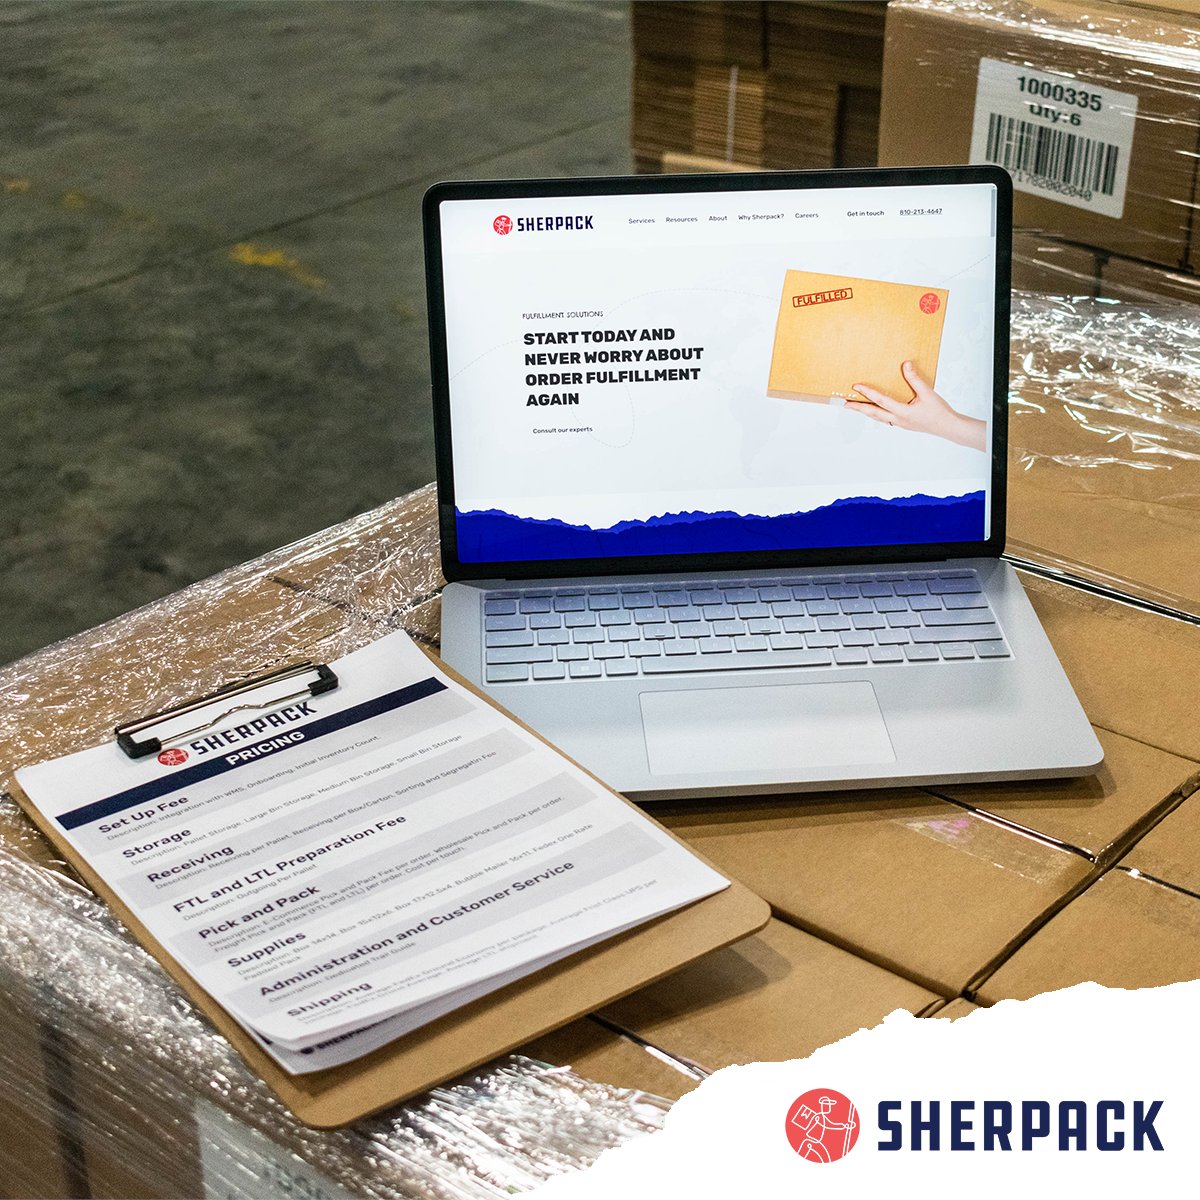 At Sherpack, we believe in treating every product with the utmost care and fostering genuine connections with our partners.

Experience our personalized approach to fulfillment. Contact us now! sherpack.com/contact/

#orderfulfillment #3pl #fulfillmentcenter